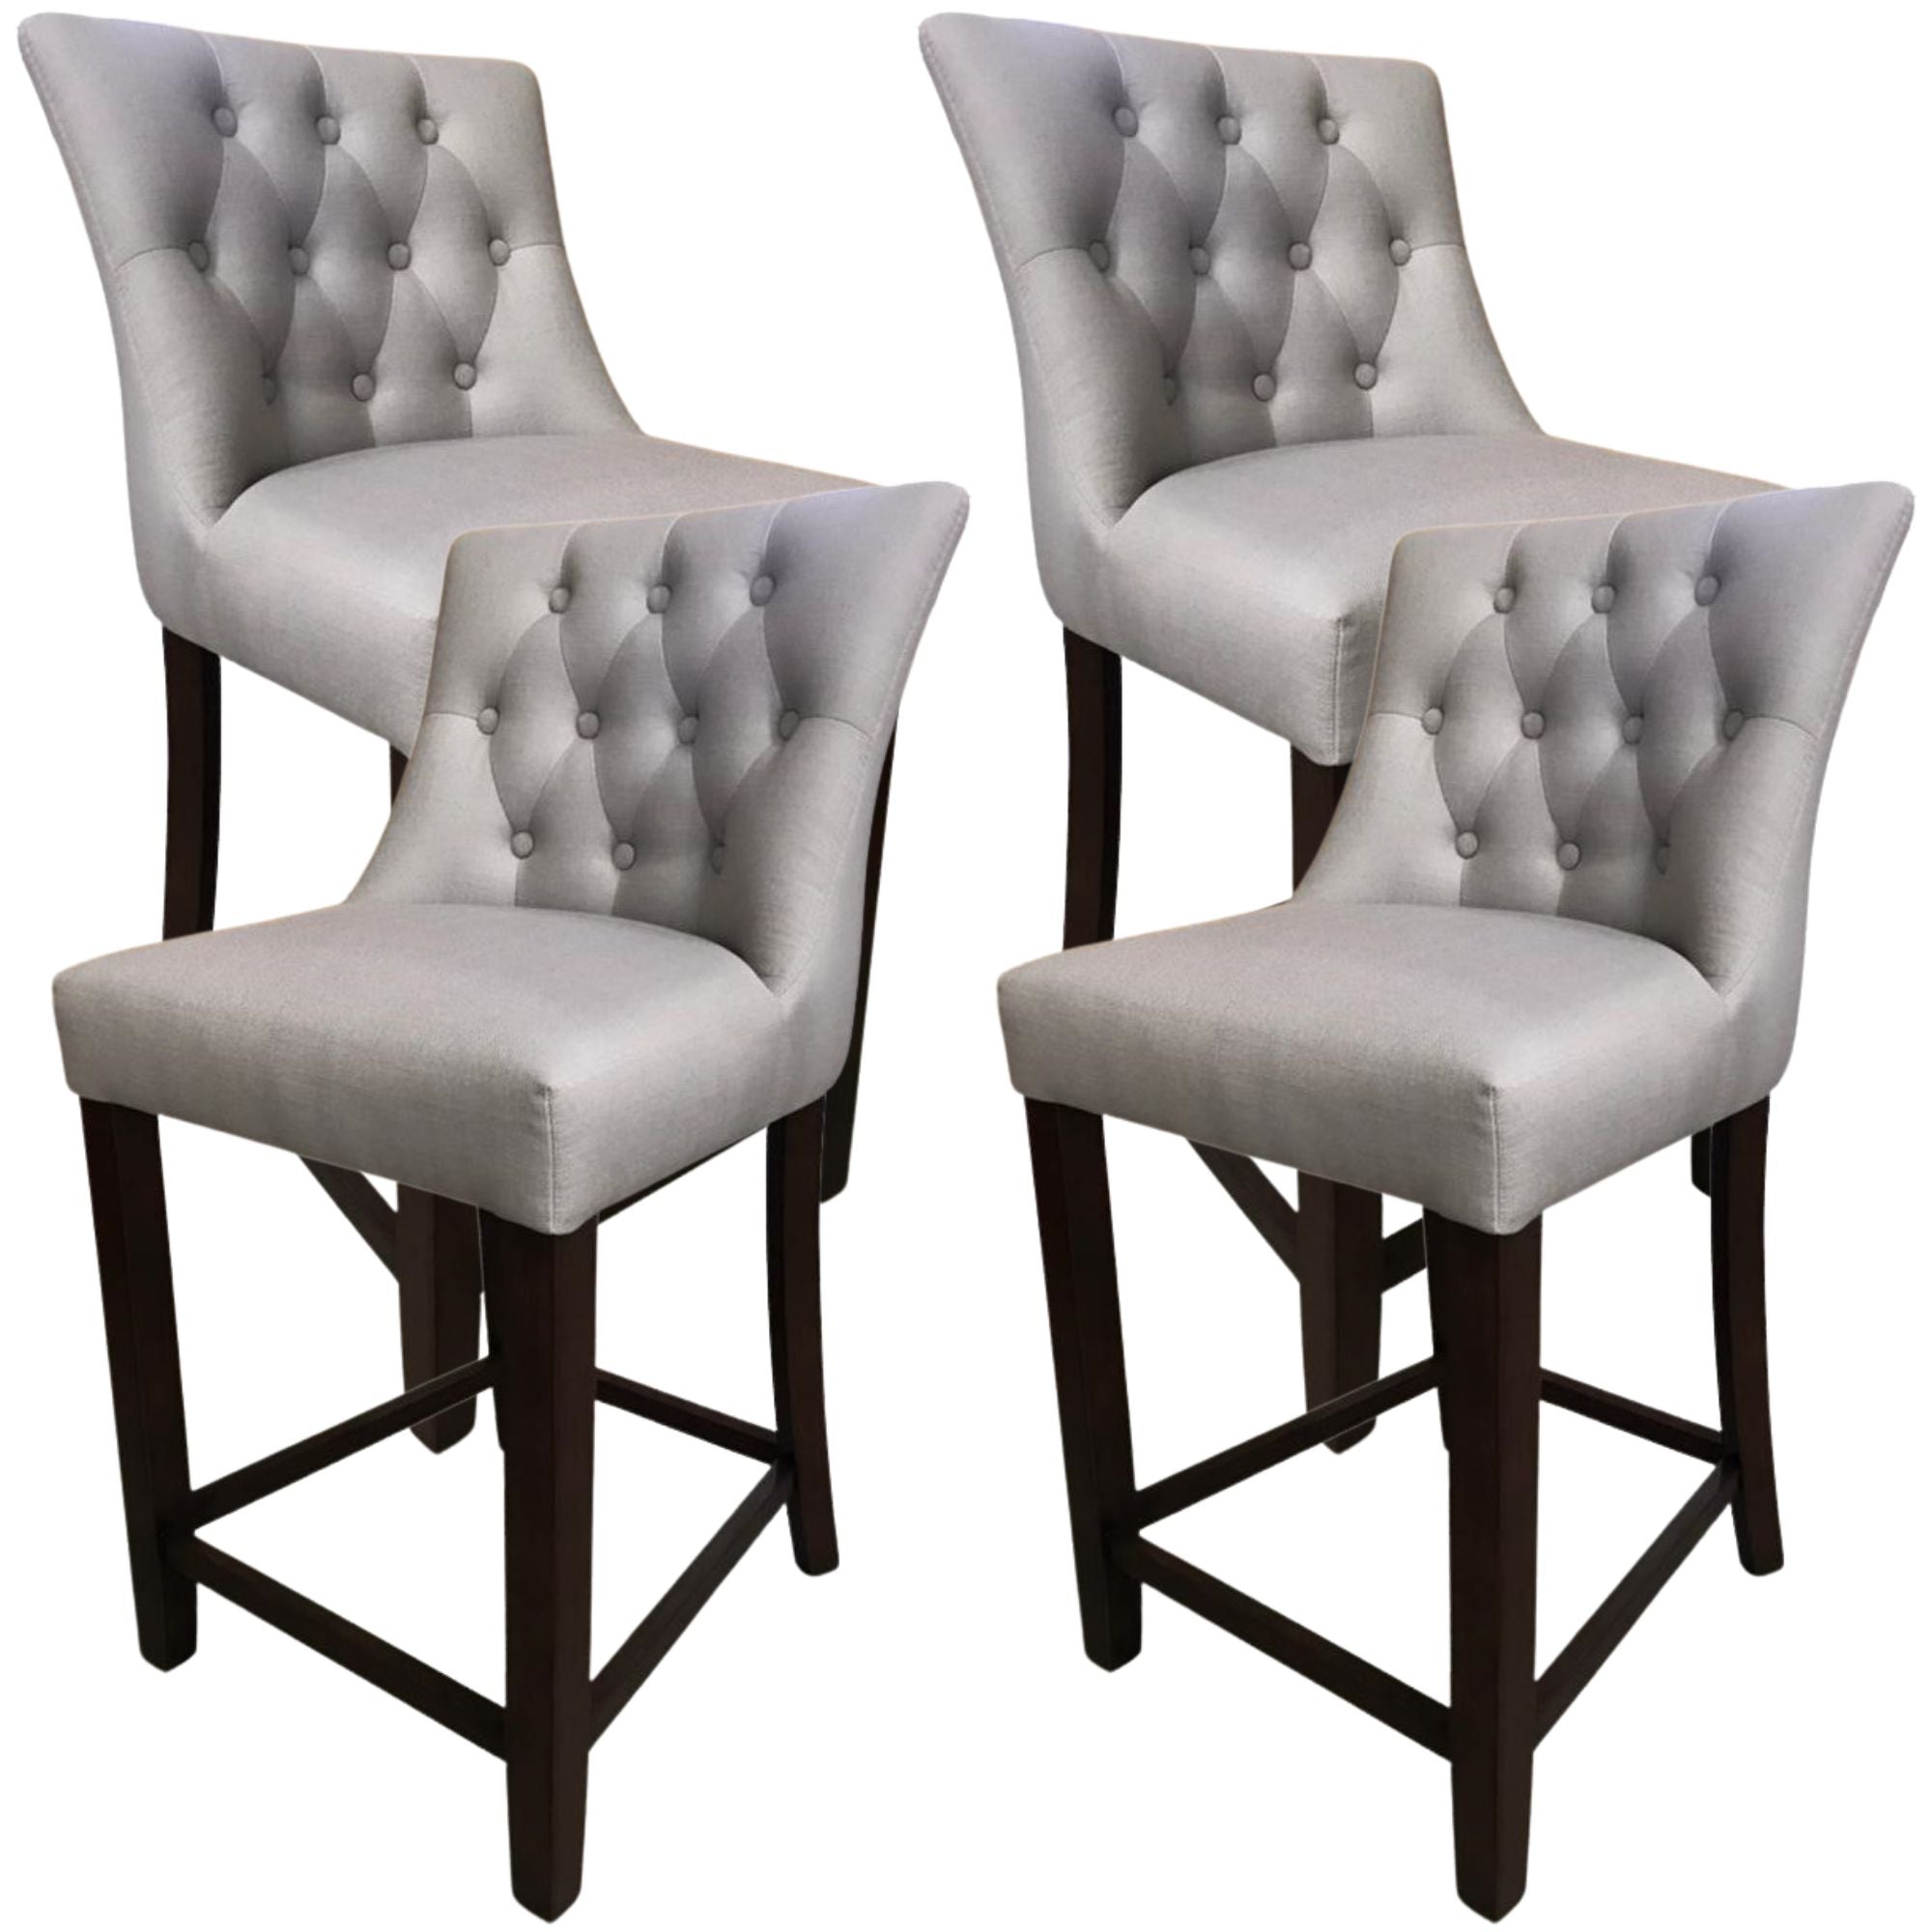 florence-4pc-high-fabric-dining-chair-bar-stool-french-provincial-solid-timber